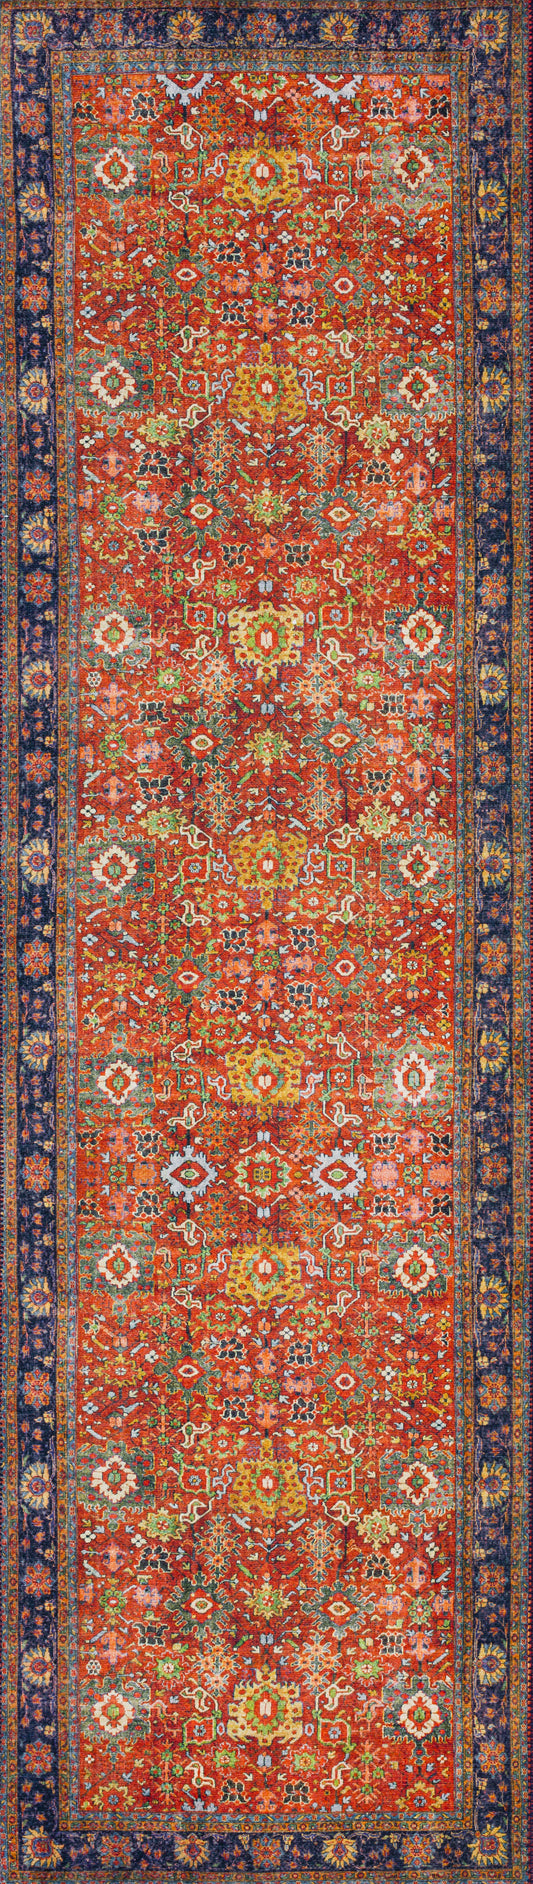 Amanti AM5 Machine Woven Synthetic Blend Indoor Area Rug by Dalyn Rugs